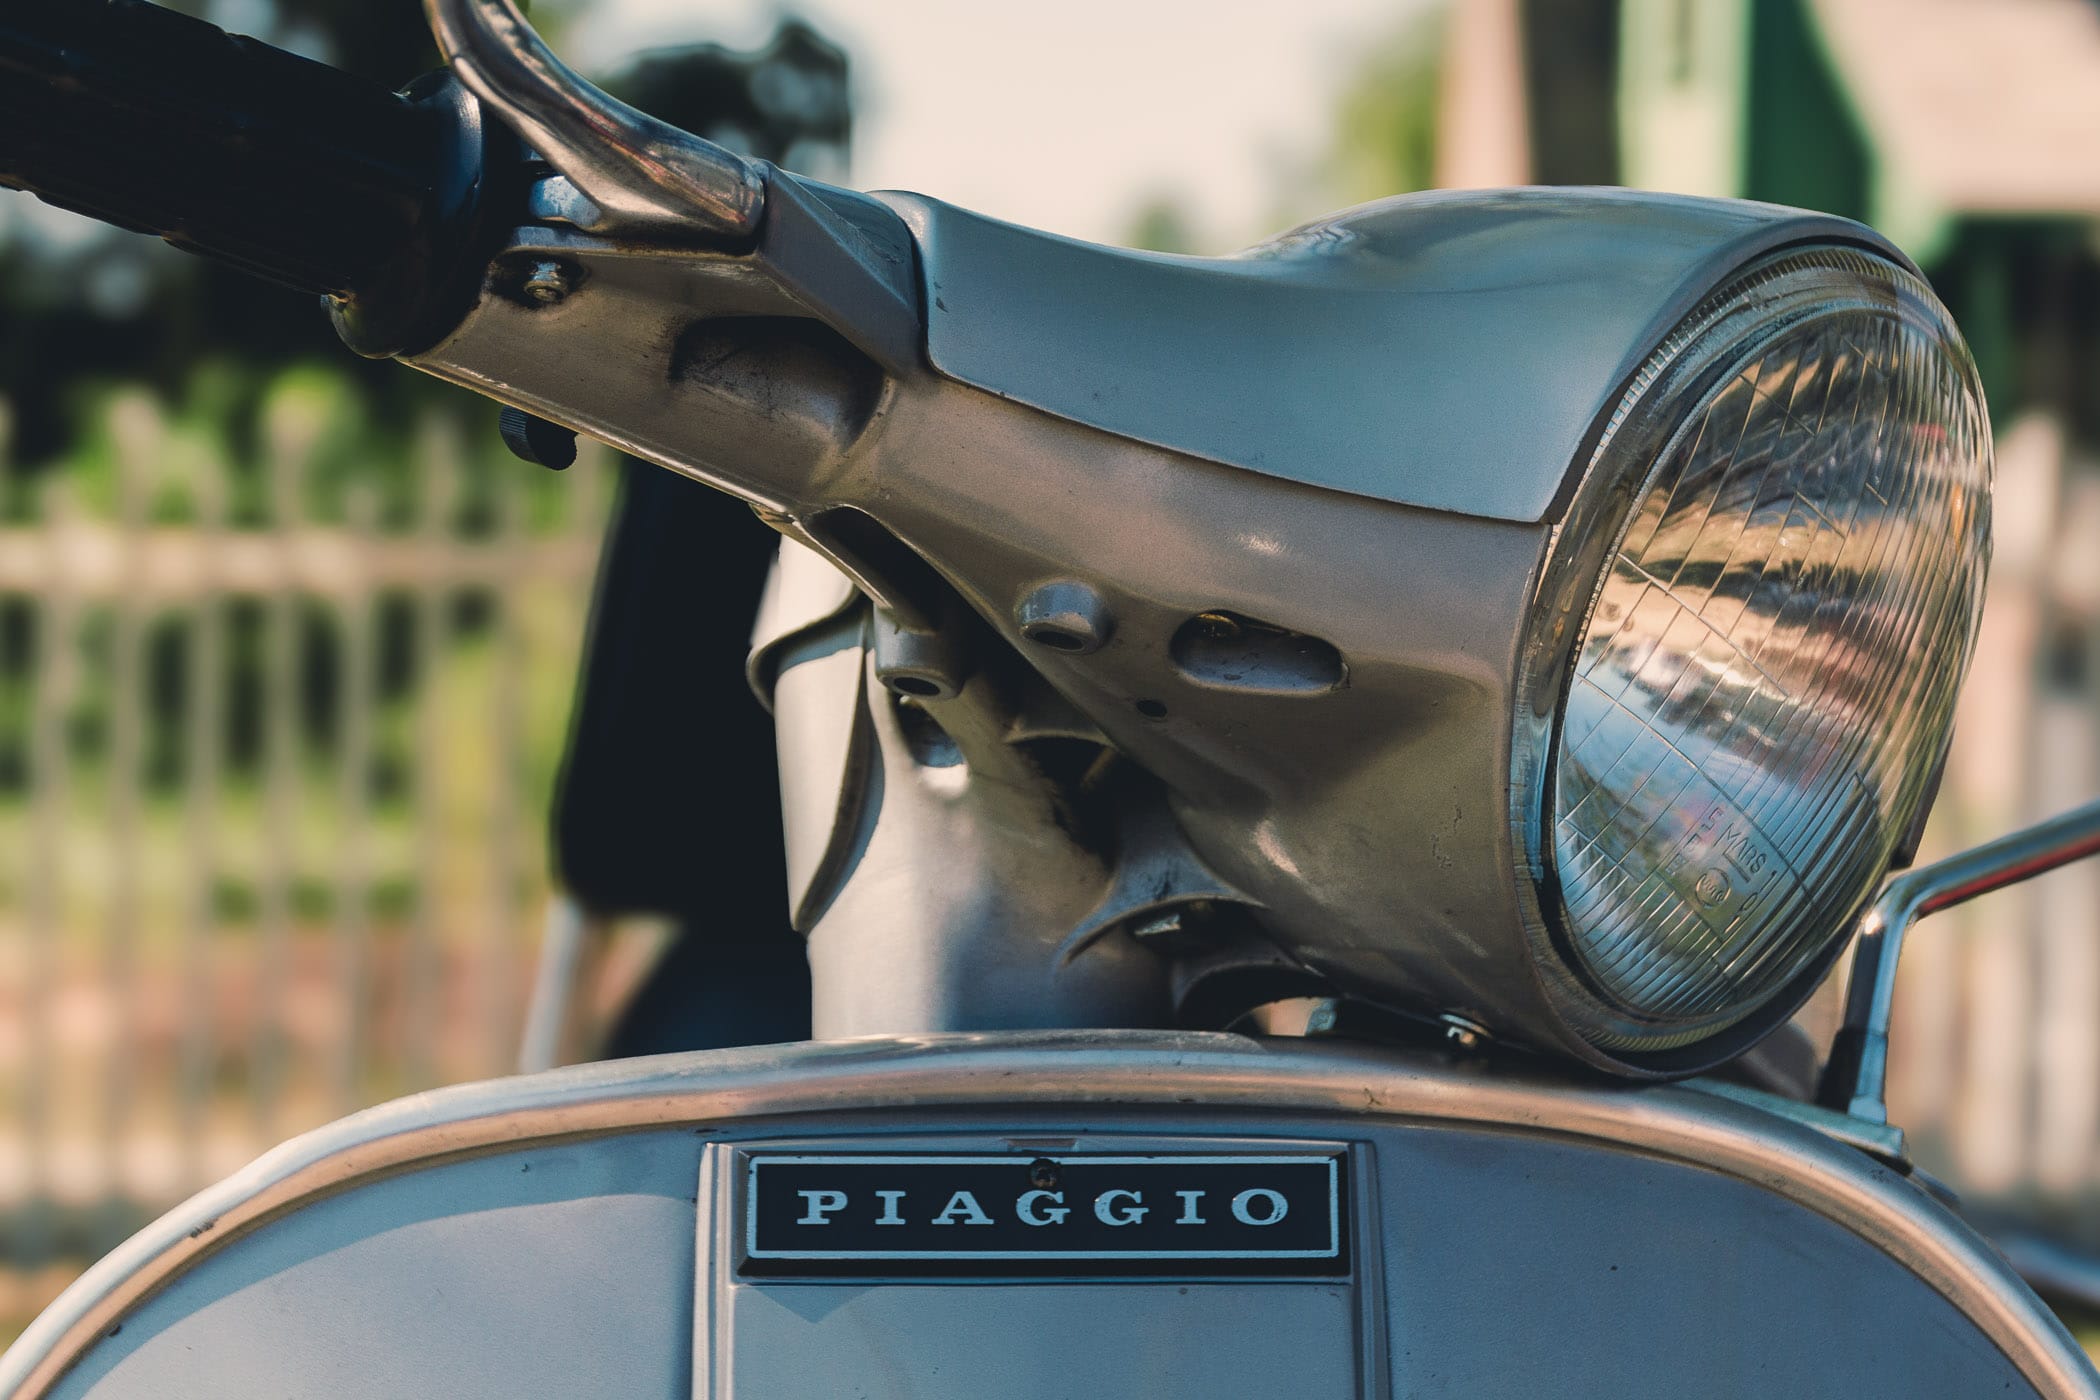 Detail of a Piaggio Vespa scooter at ItalianCarFest in Grapevine, Texas.